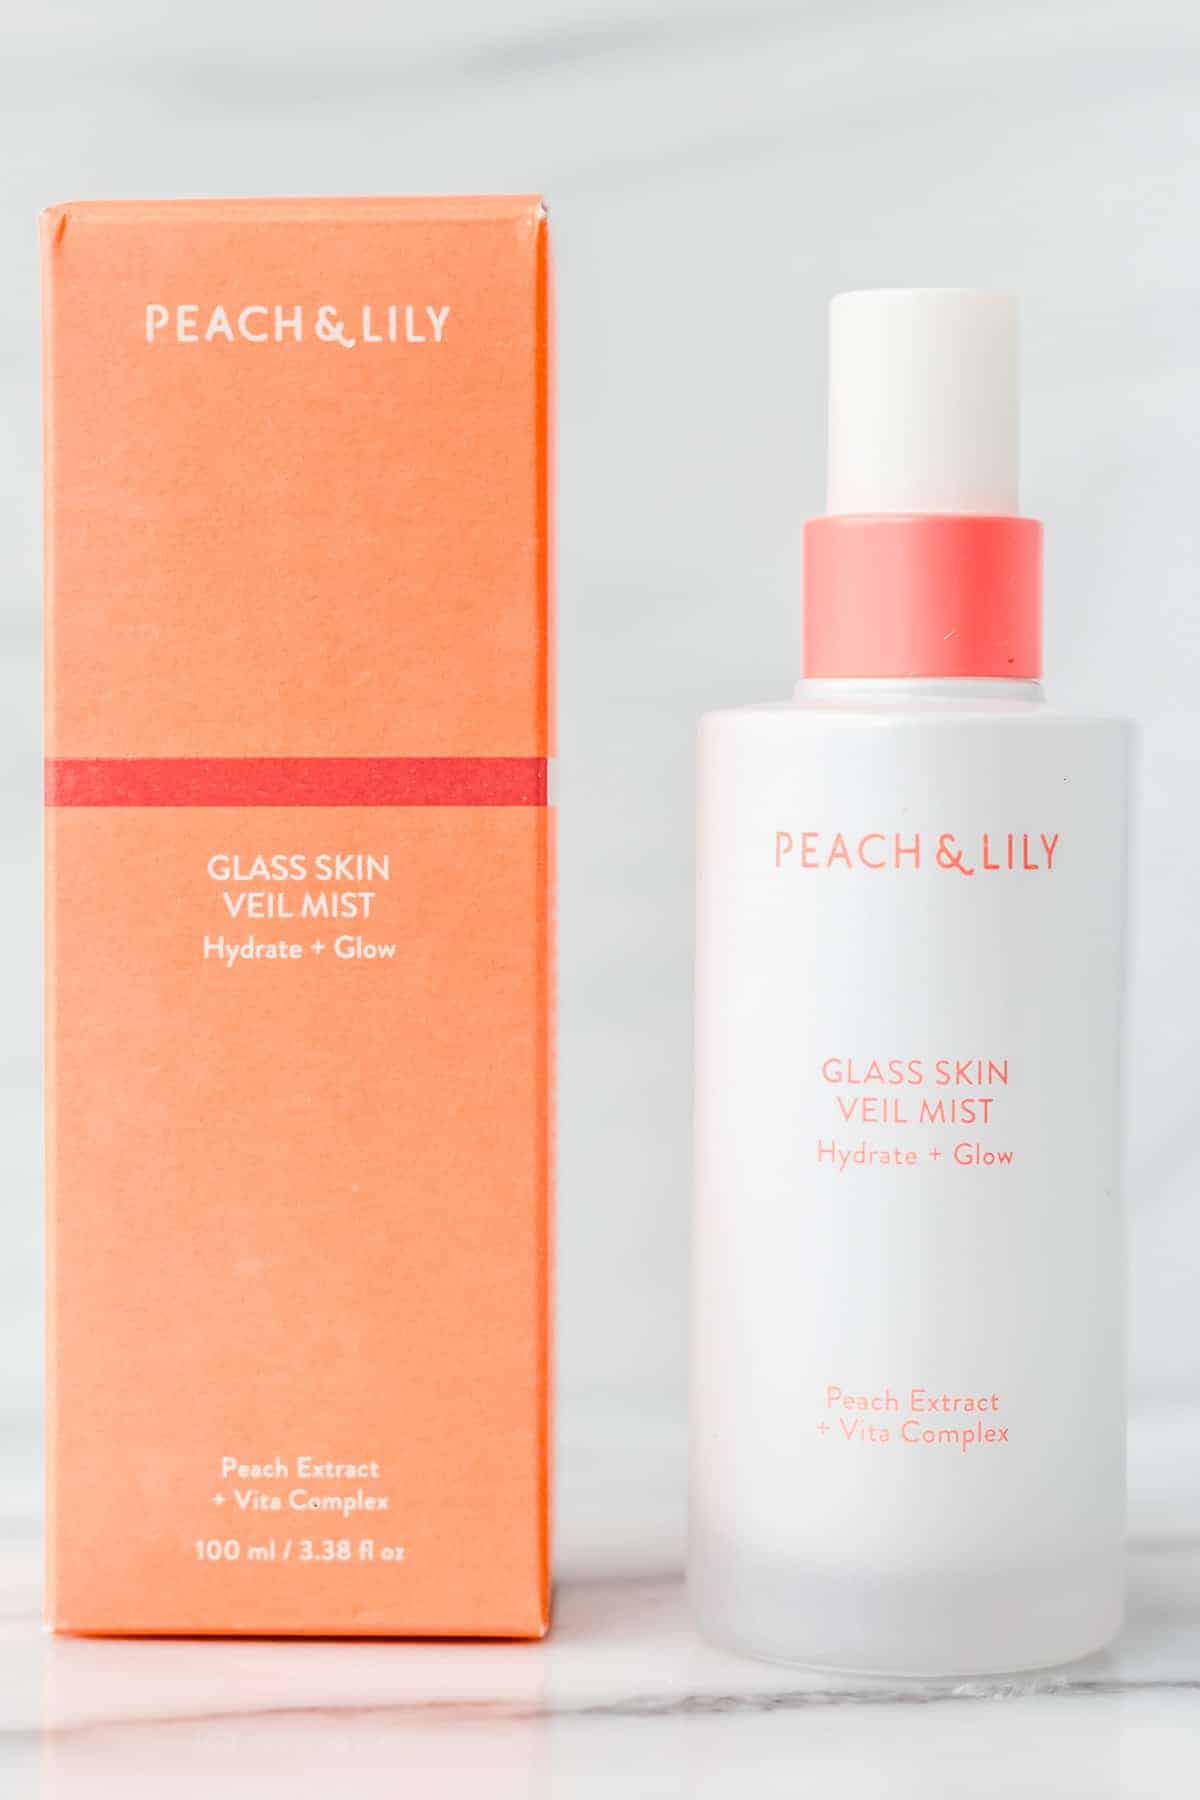 Peach & Lily Glass Skin Veil Mist bottle and box on a white background.